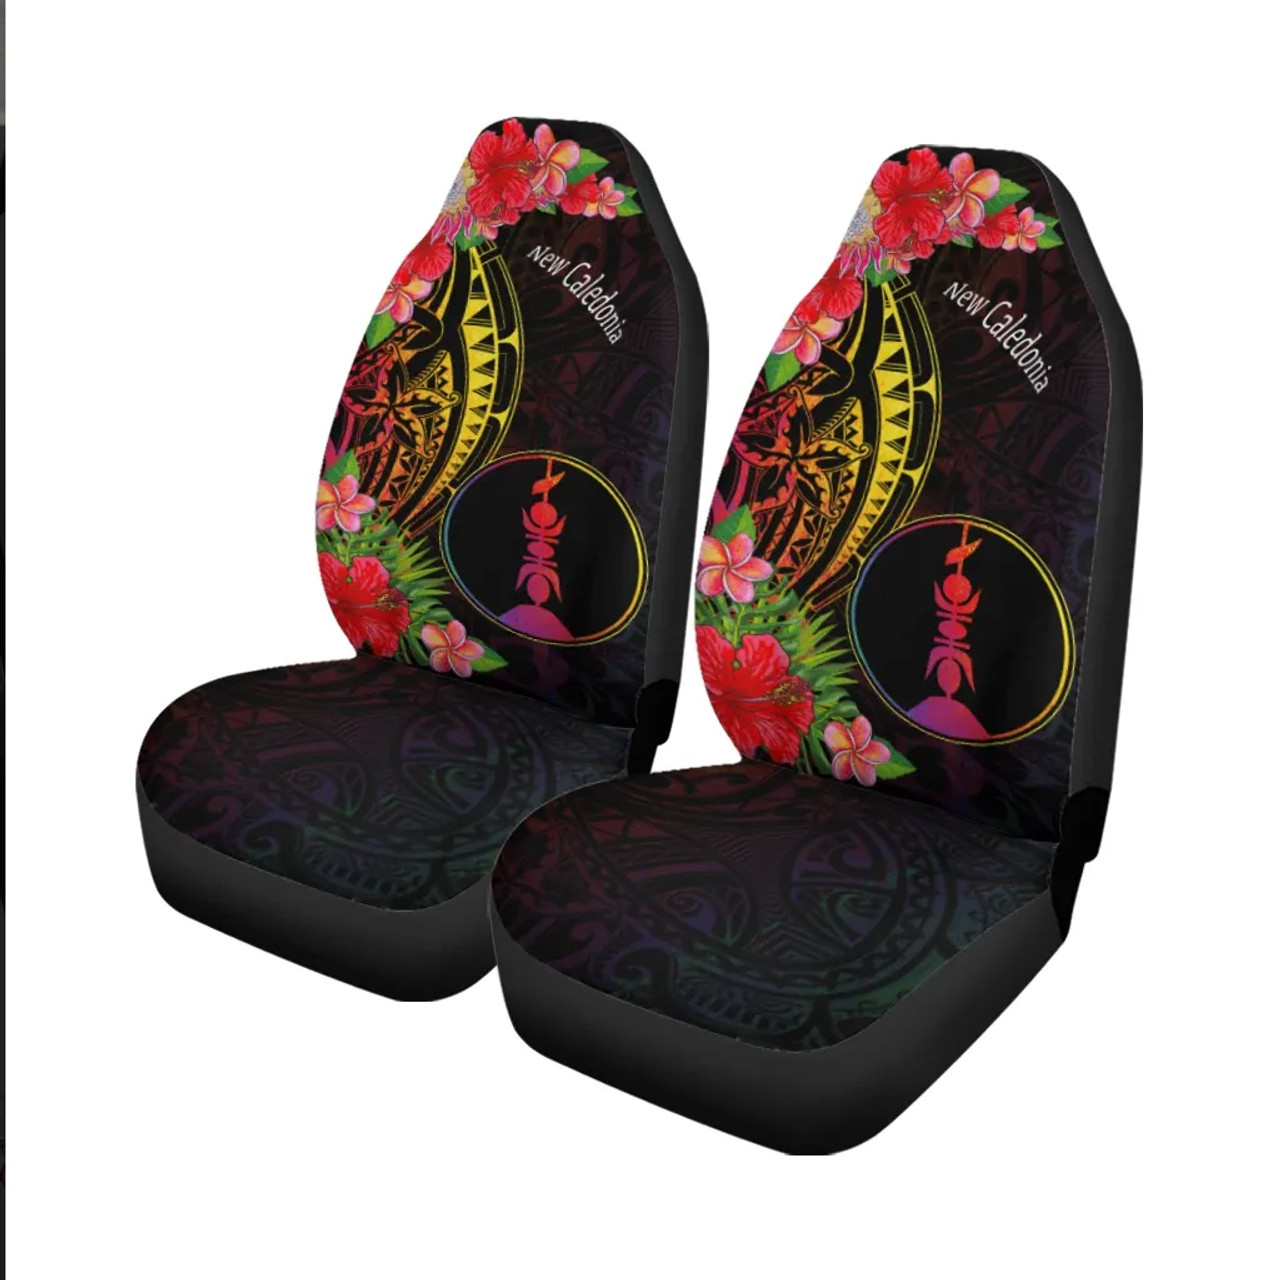 New Caledonia Car Seat Cover - Tropical Hippie Style